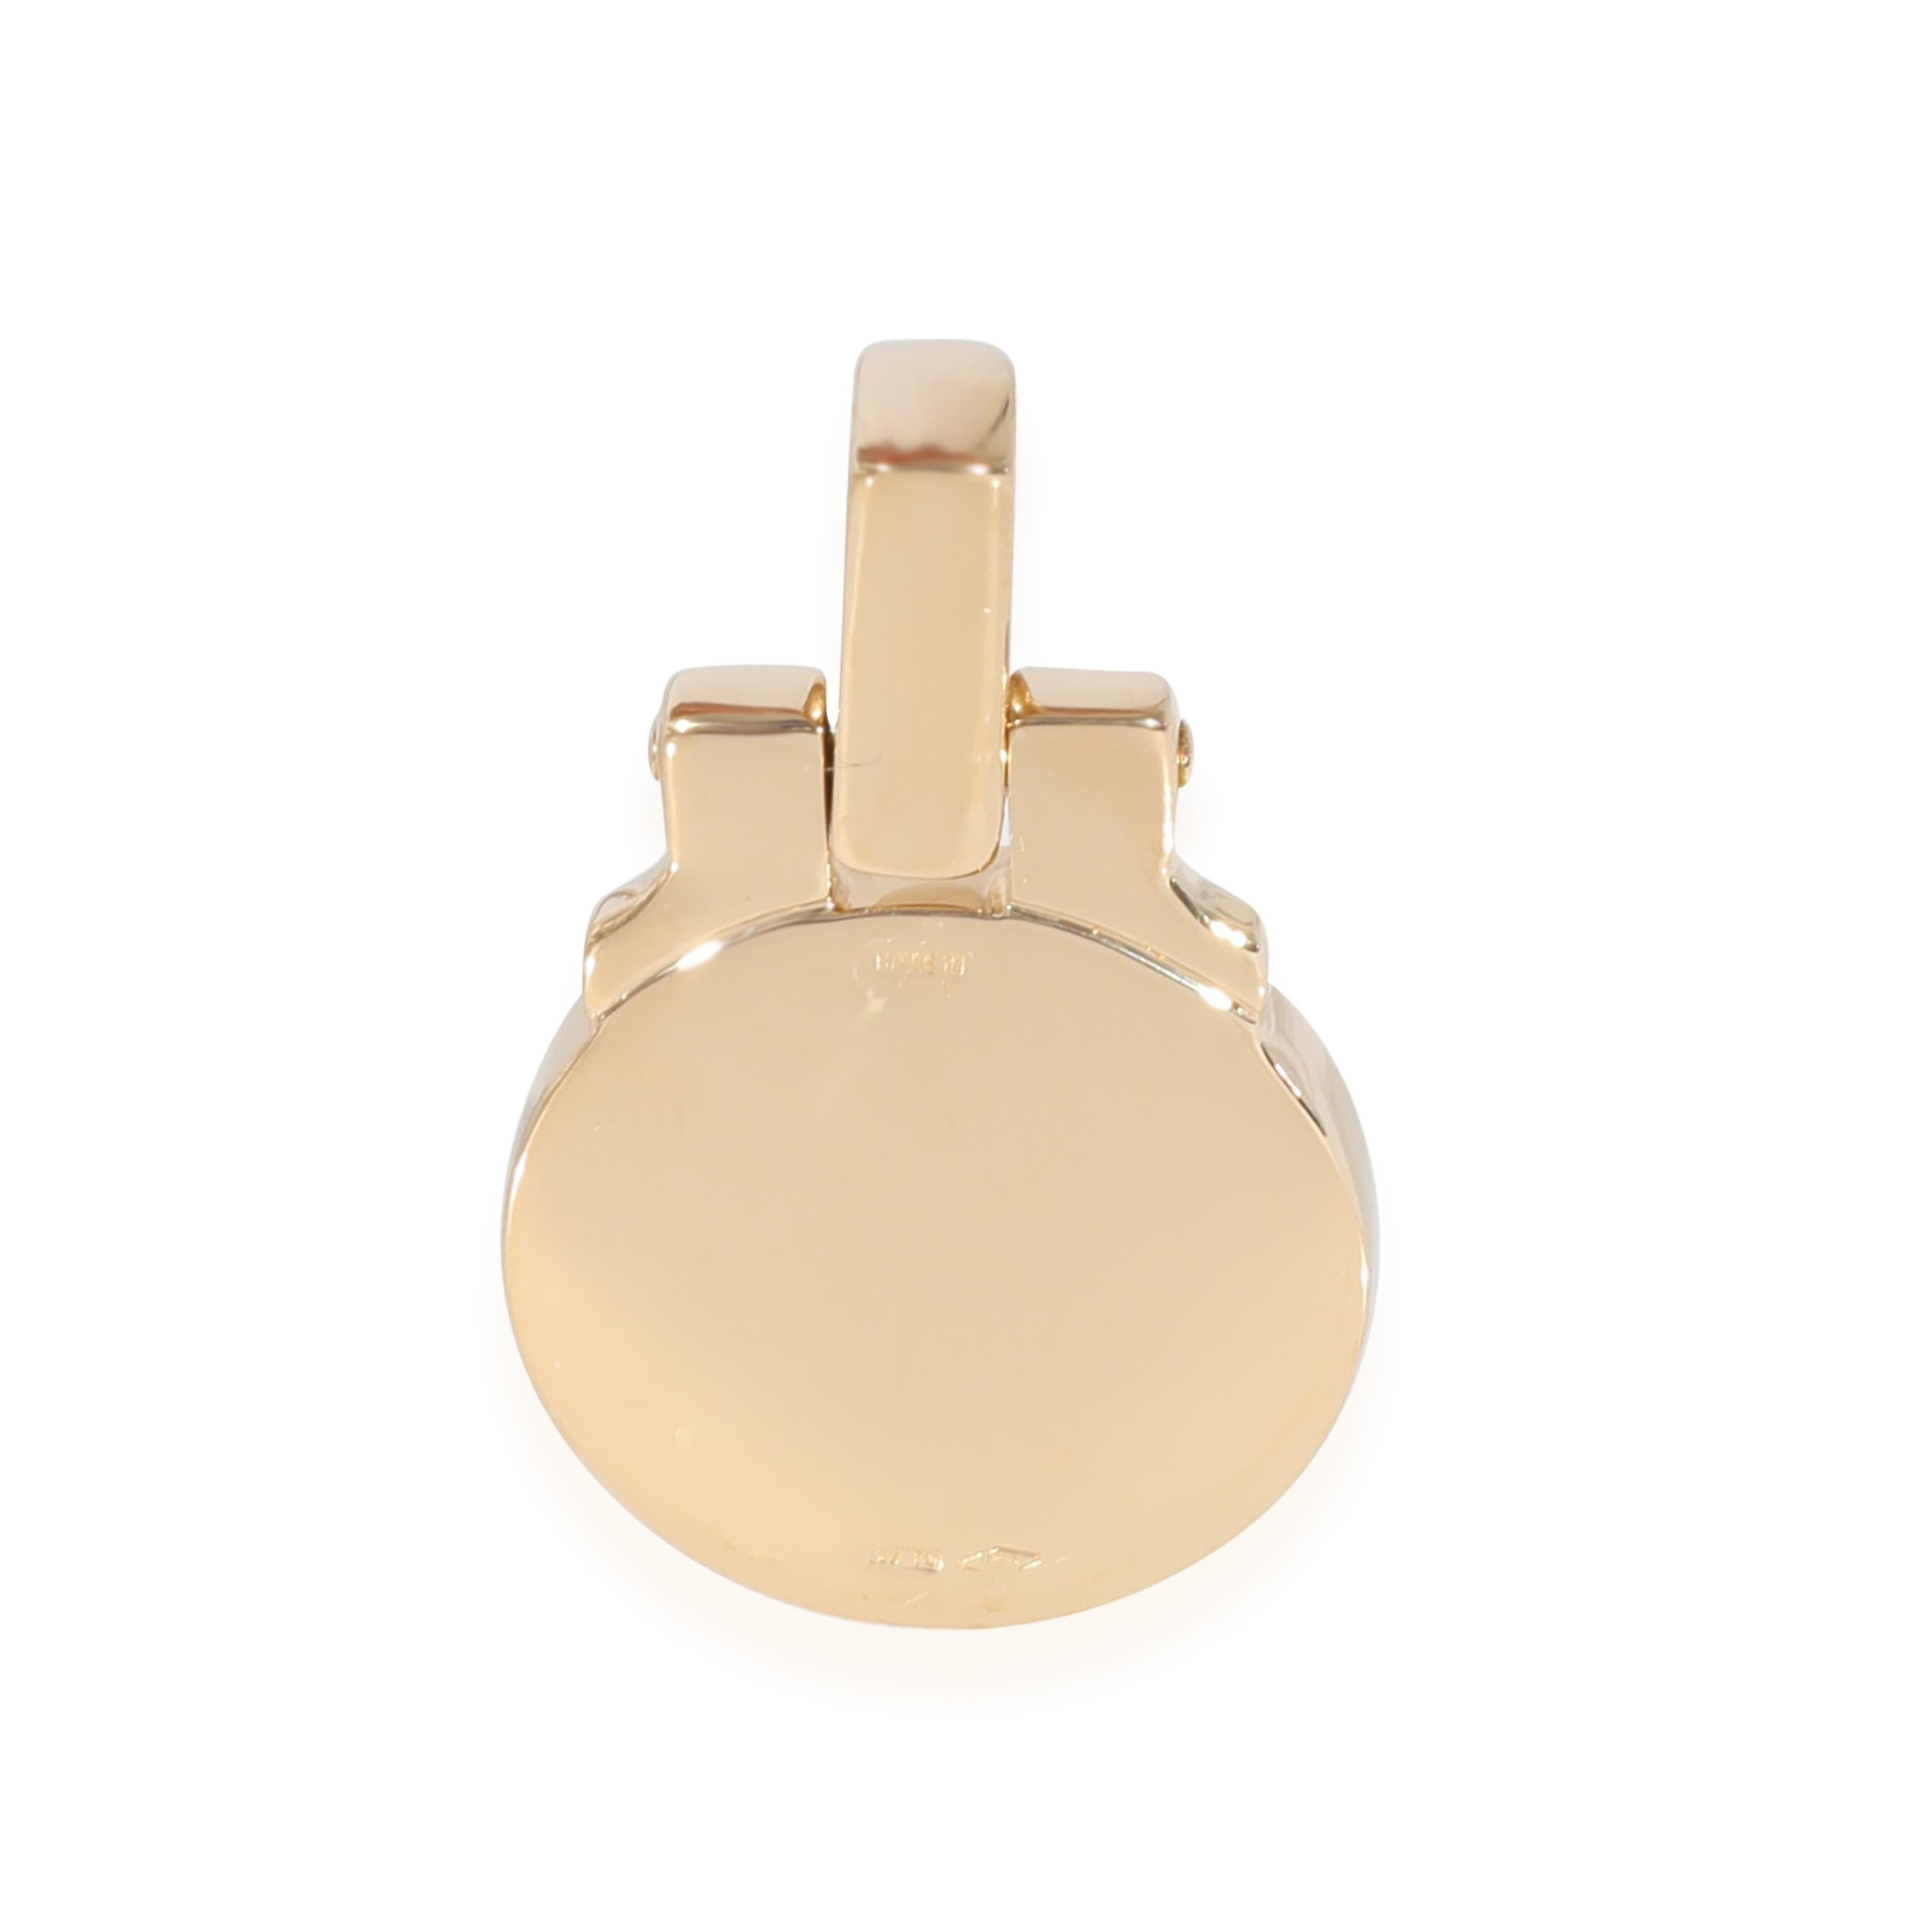 BVLGARI BVLGARI Pendant in 18KT Yellow Gold

PRIMARY DETAILS
SKU: 128918
Listing Title: BVLGARI BVLGARI Pendant in 18KT Yellow Gold
Condition Description: Retails for 1790 USD. In excellent condition and recently polished.
Brand: